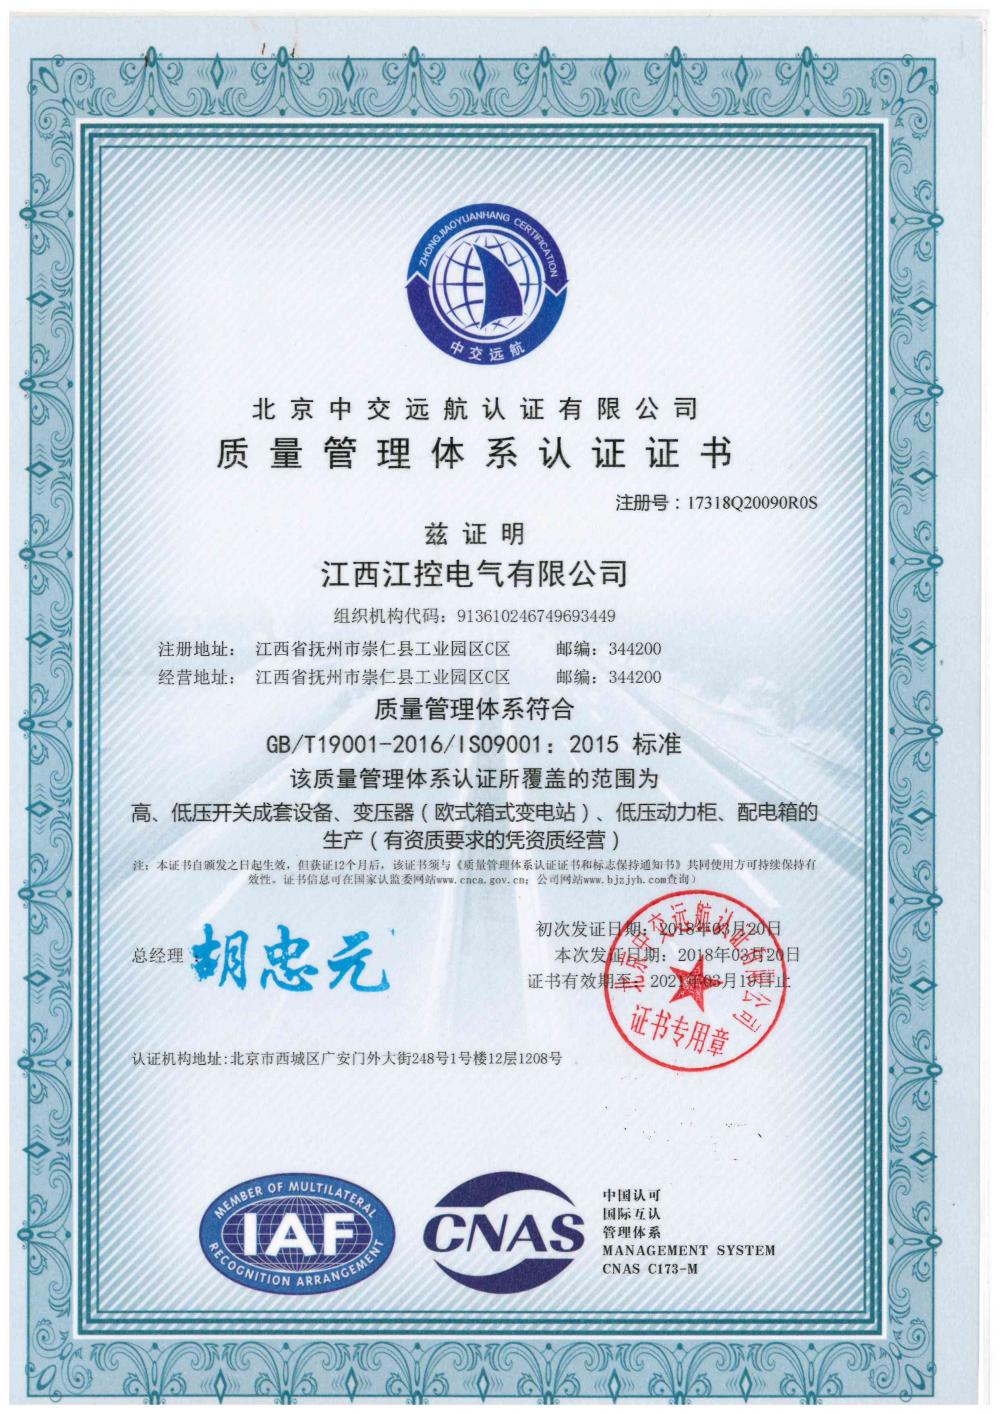 certificate of conformity of quality management system certification